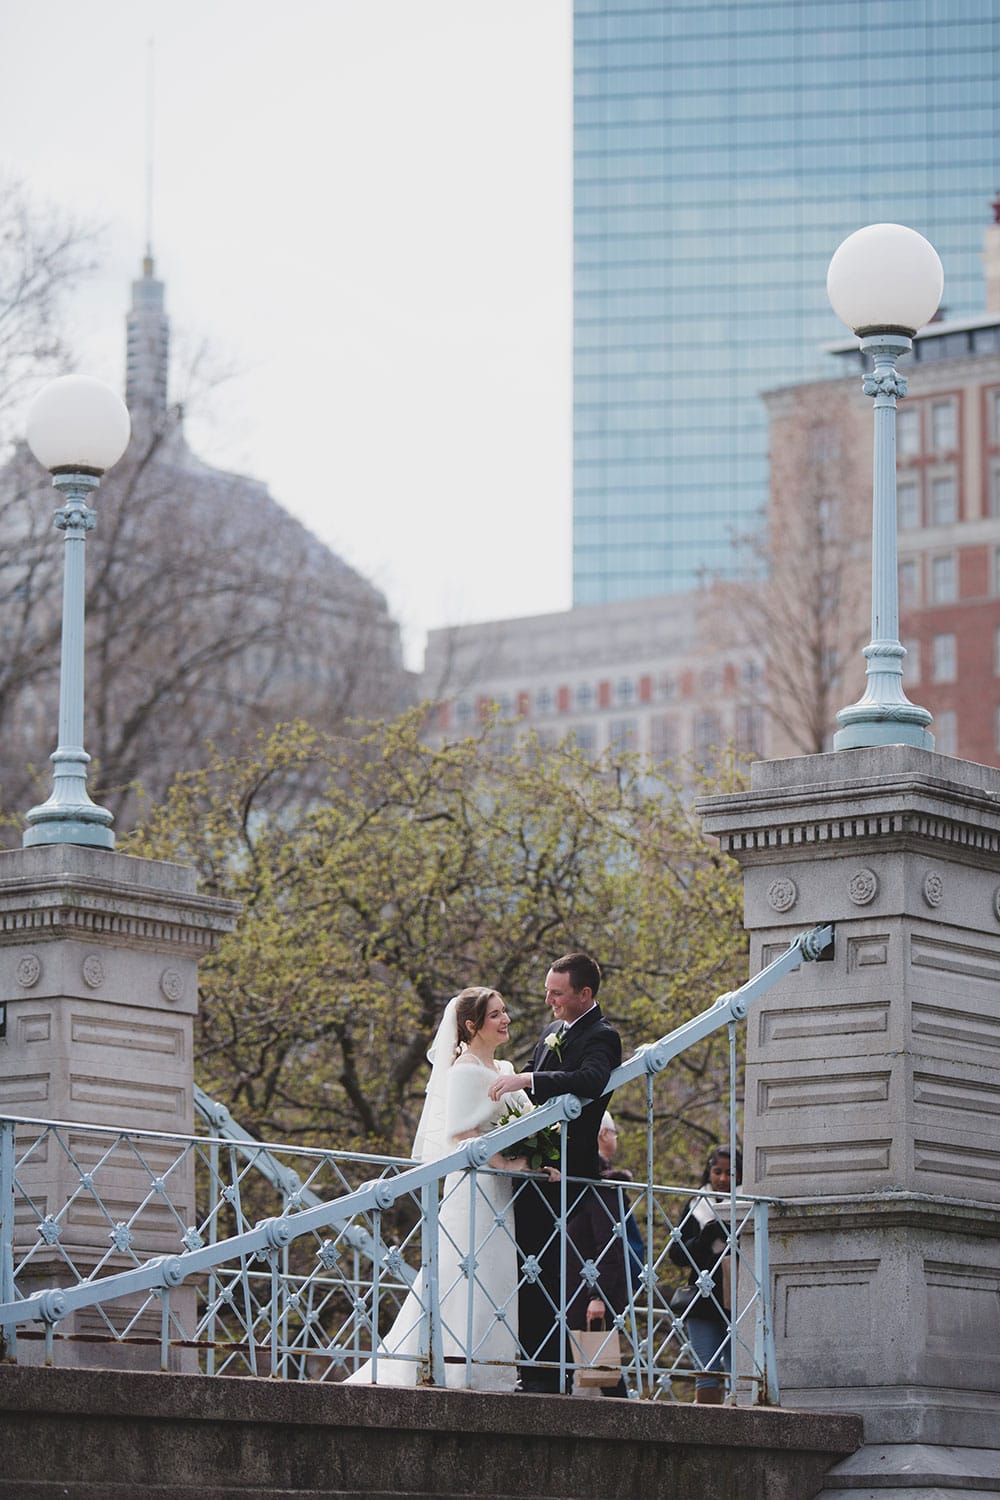 A documentary photograph of a bride and groom laughing together during their Wedding Portraits in Boston Public Gardens and Beacon Hill